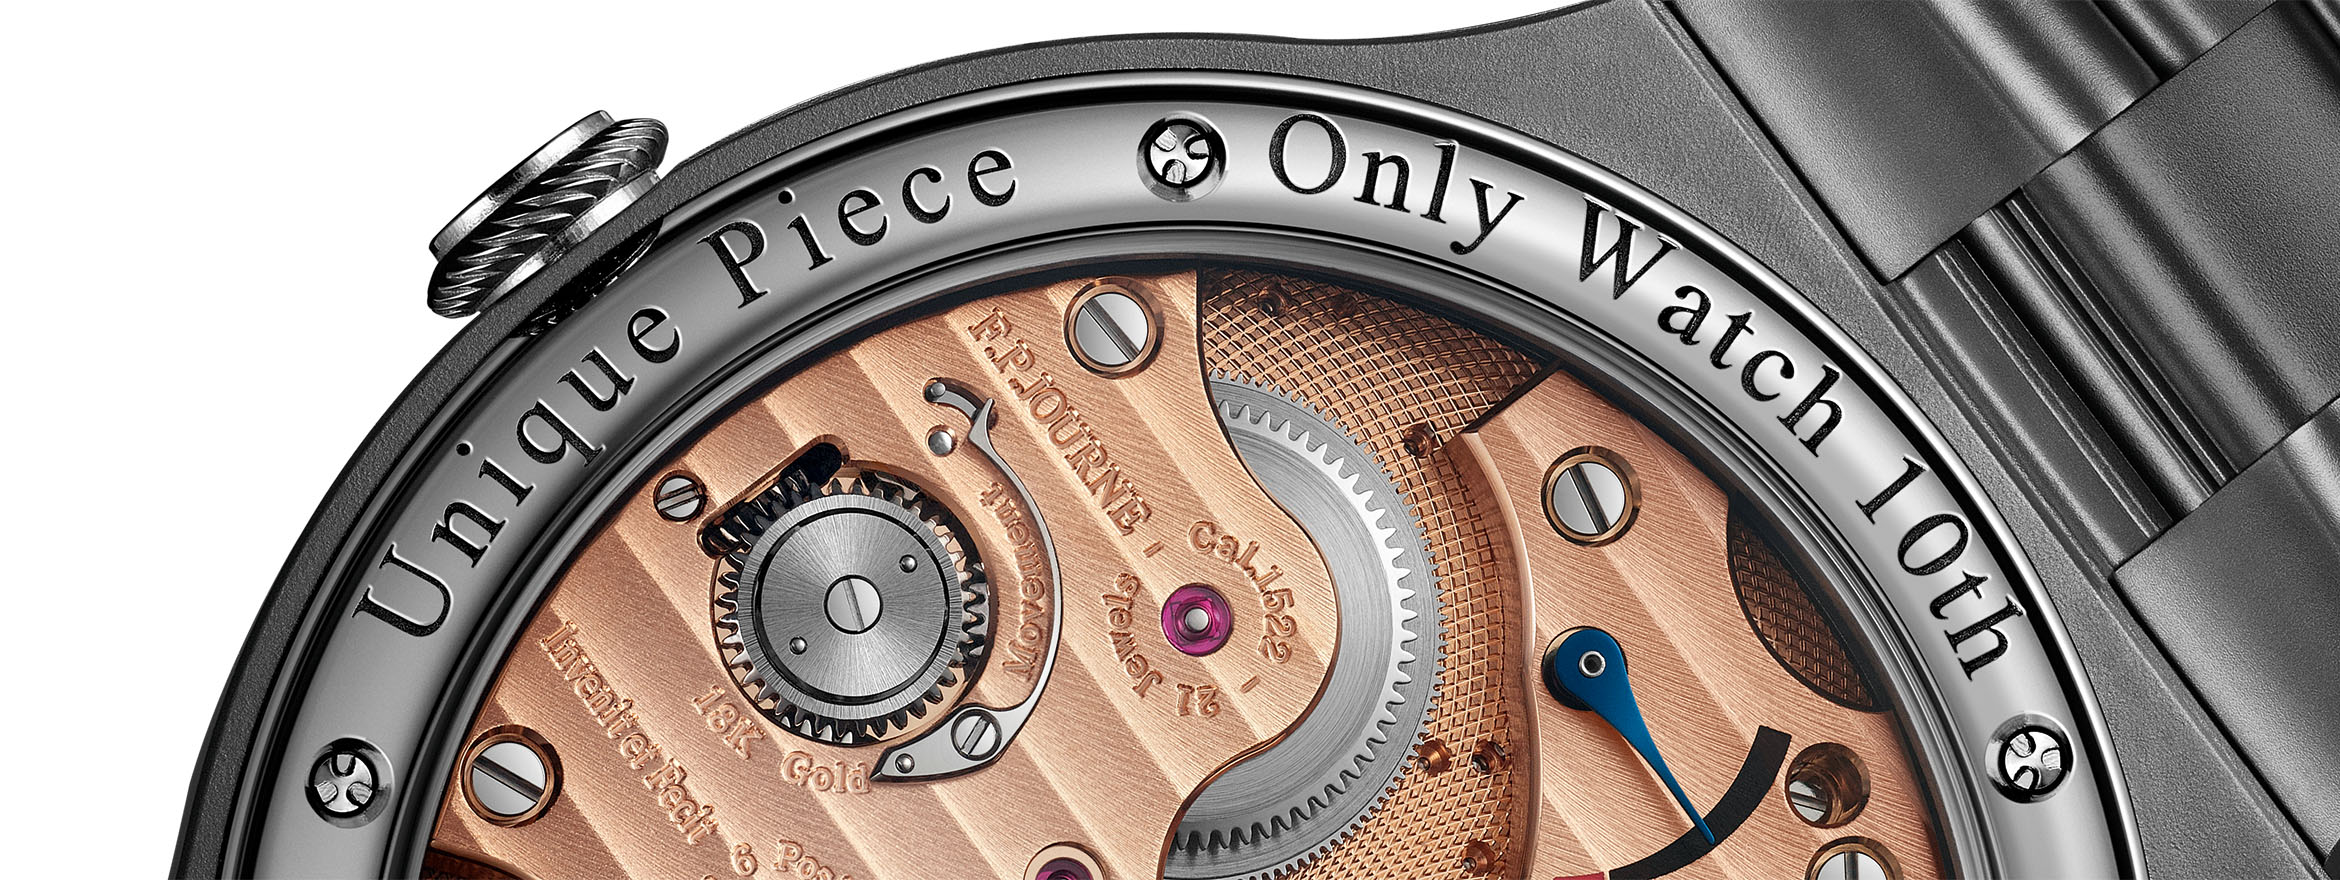 Only Watch 2023: The Artisanal Offerings That Have Caught Our Eye – Part 1